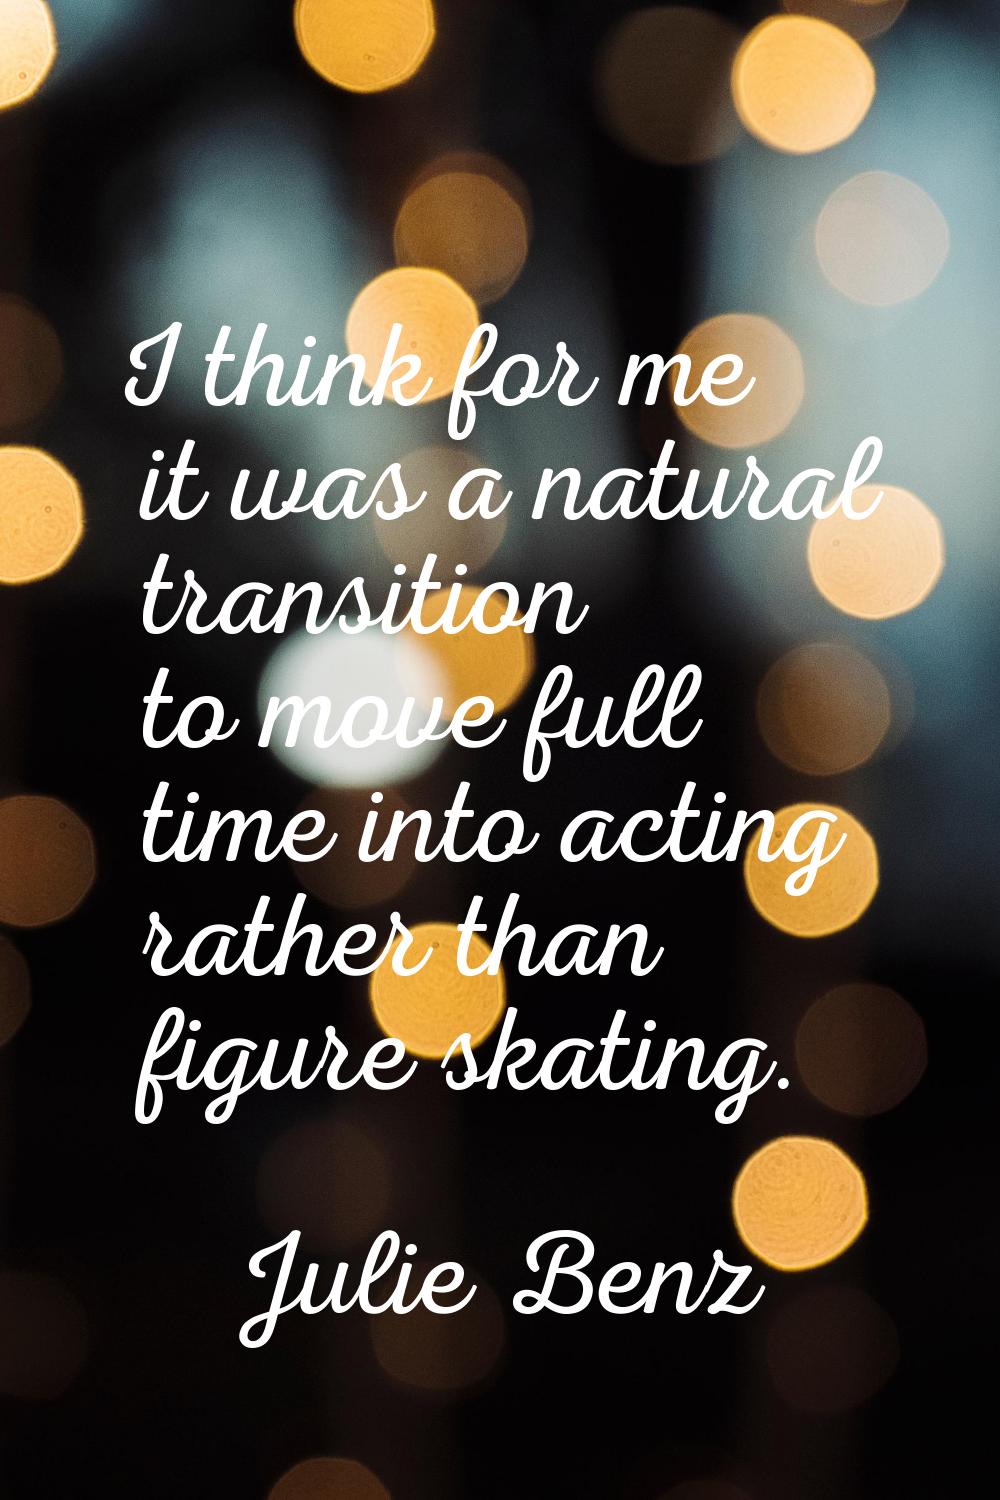 I think for me it was a natural transition to move full time into acting rather than figure skating